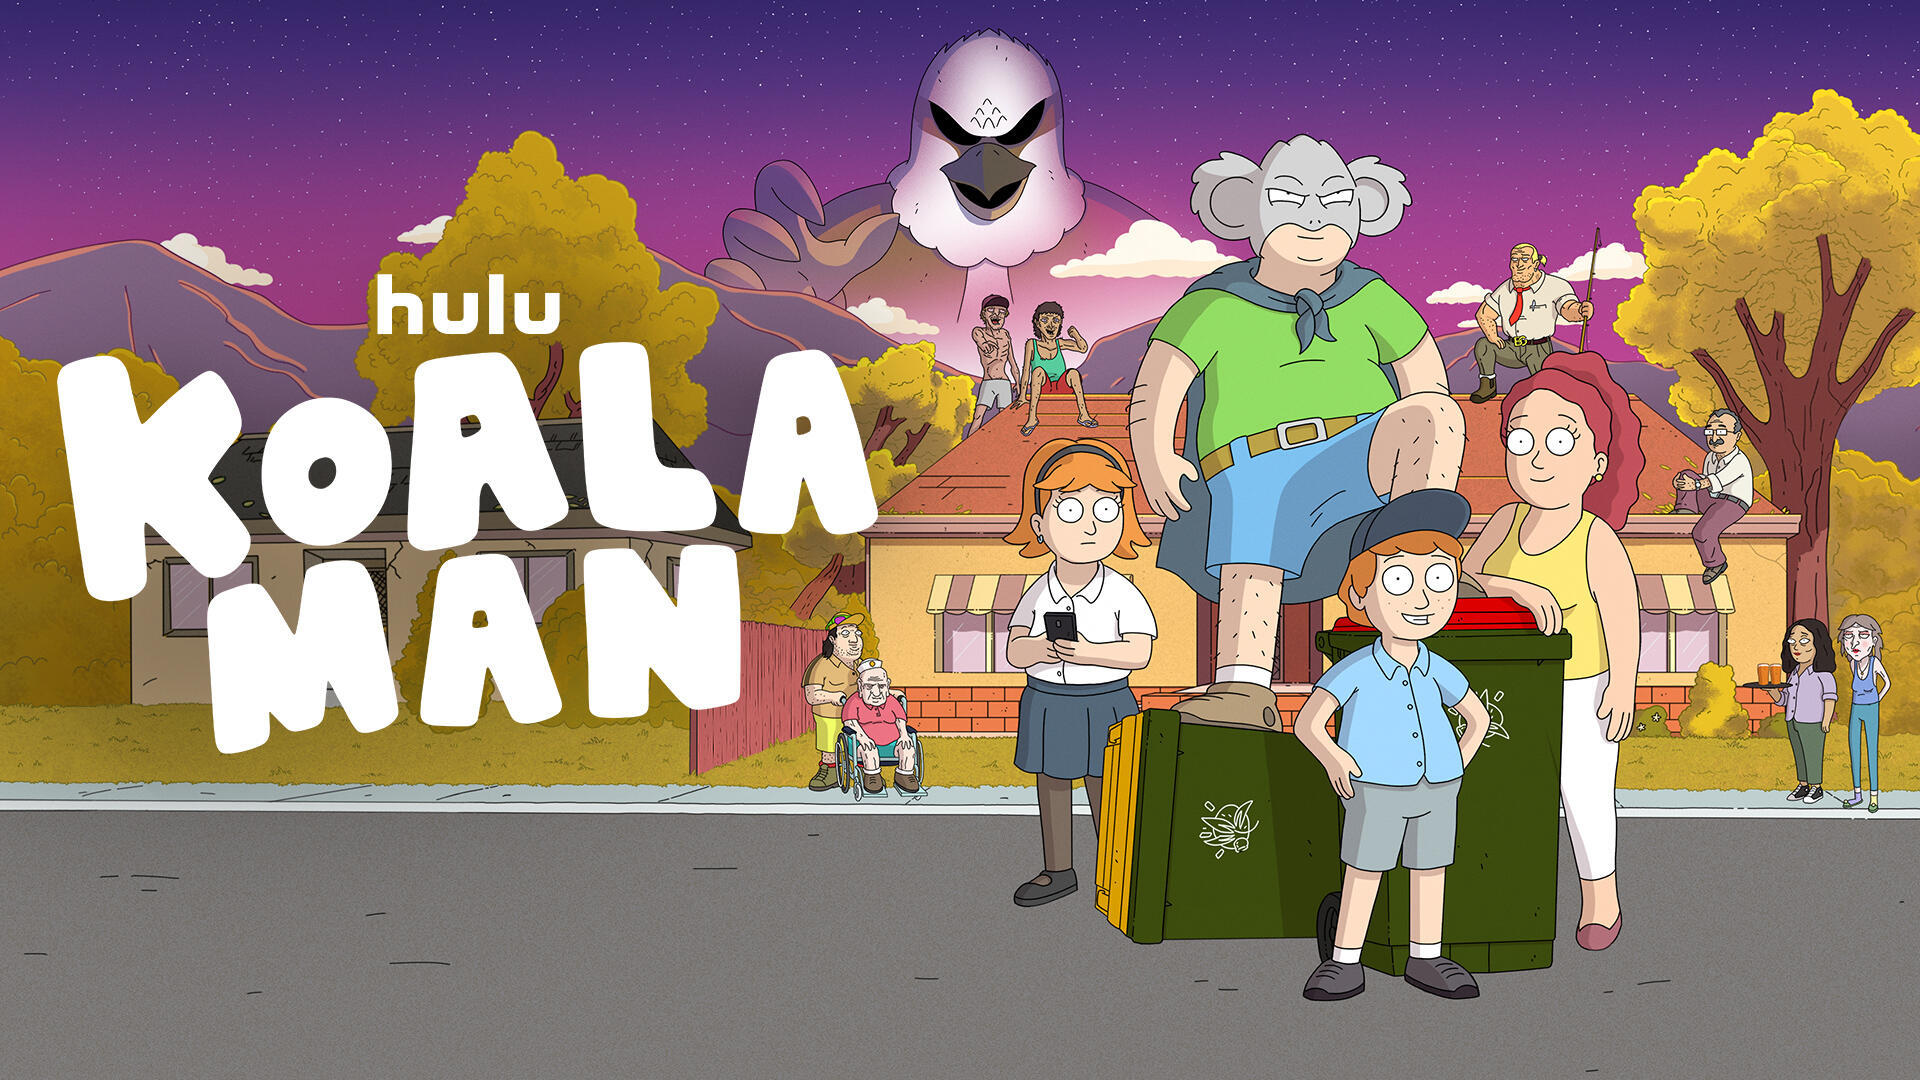 Koala Man -- Season 1 -- “Koala Man” follows middle-aged dad Kevin and his titular secret identity, whose only superpower is a burning passion for following rules and snuffing out petty crime. Koala Man is on a quest to clean up the town of Dapto, often roping his frustrated family into his increasingly bizarre adventures. (Courtesy of Hulu)